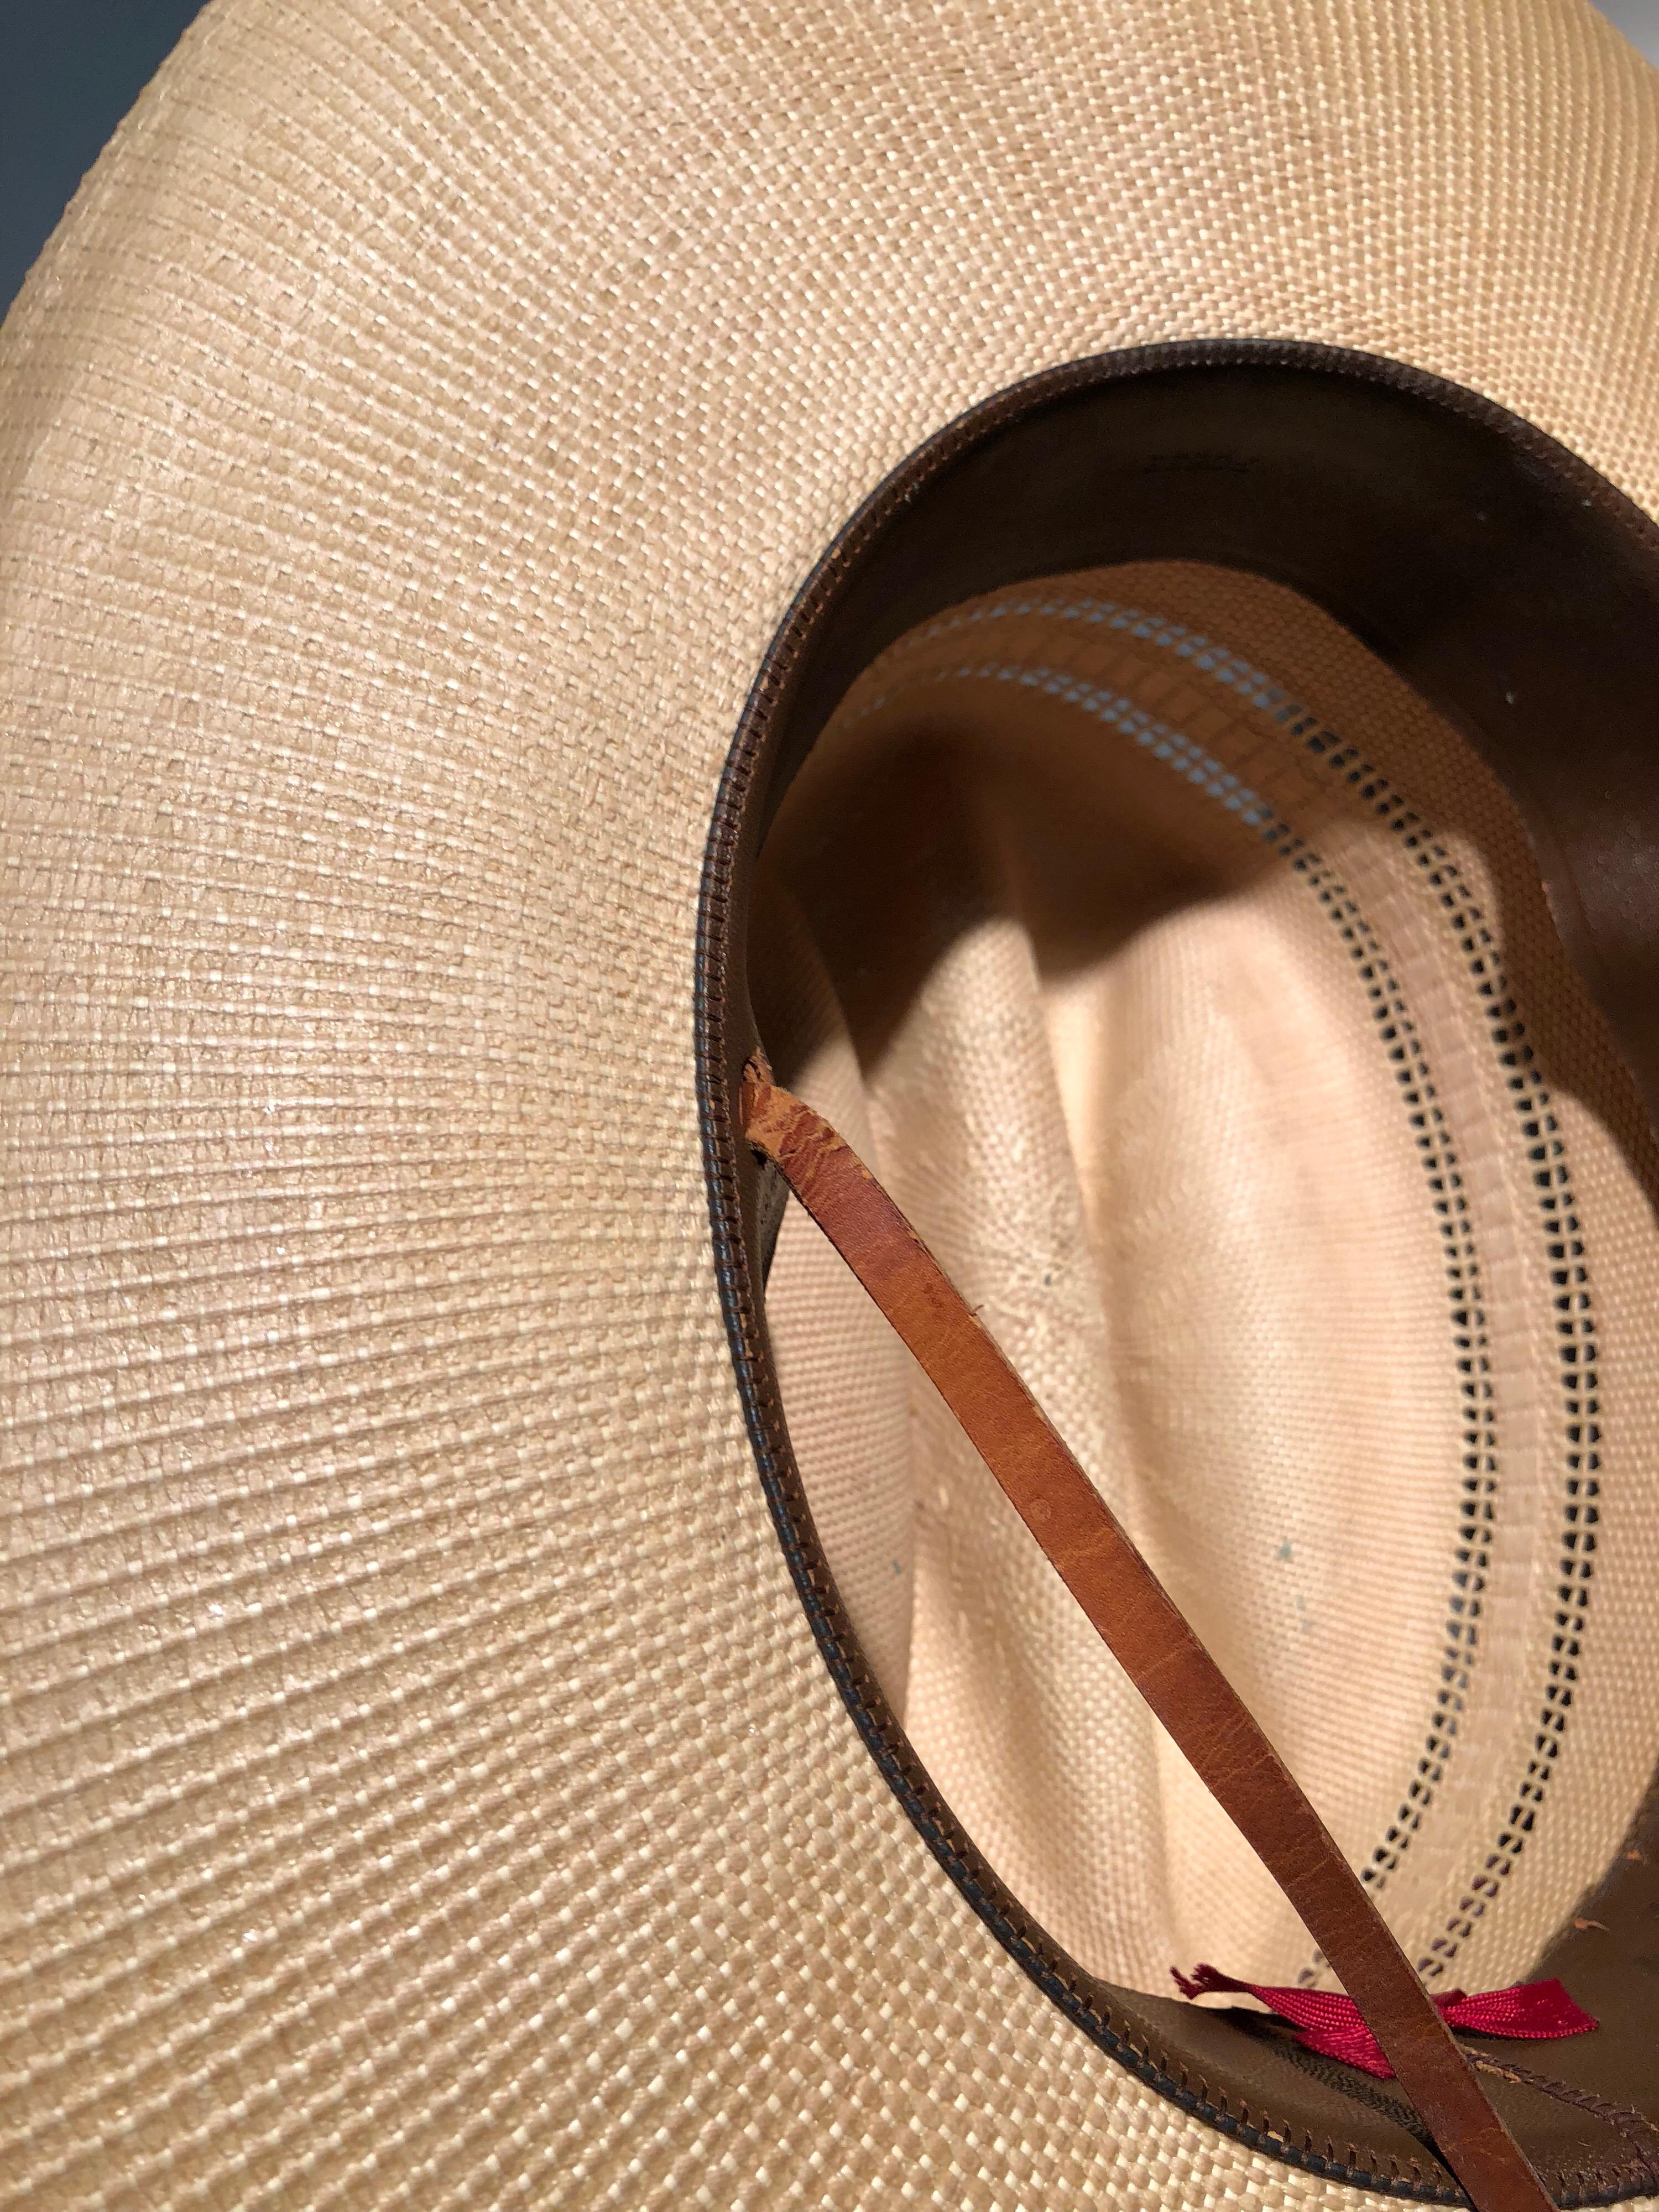 1950s Resistol Woven Straw Cowboy Western Hat W/ Leather Chin Strap 3